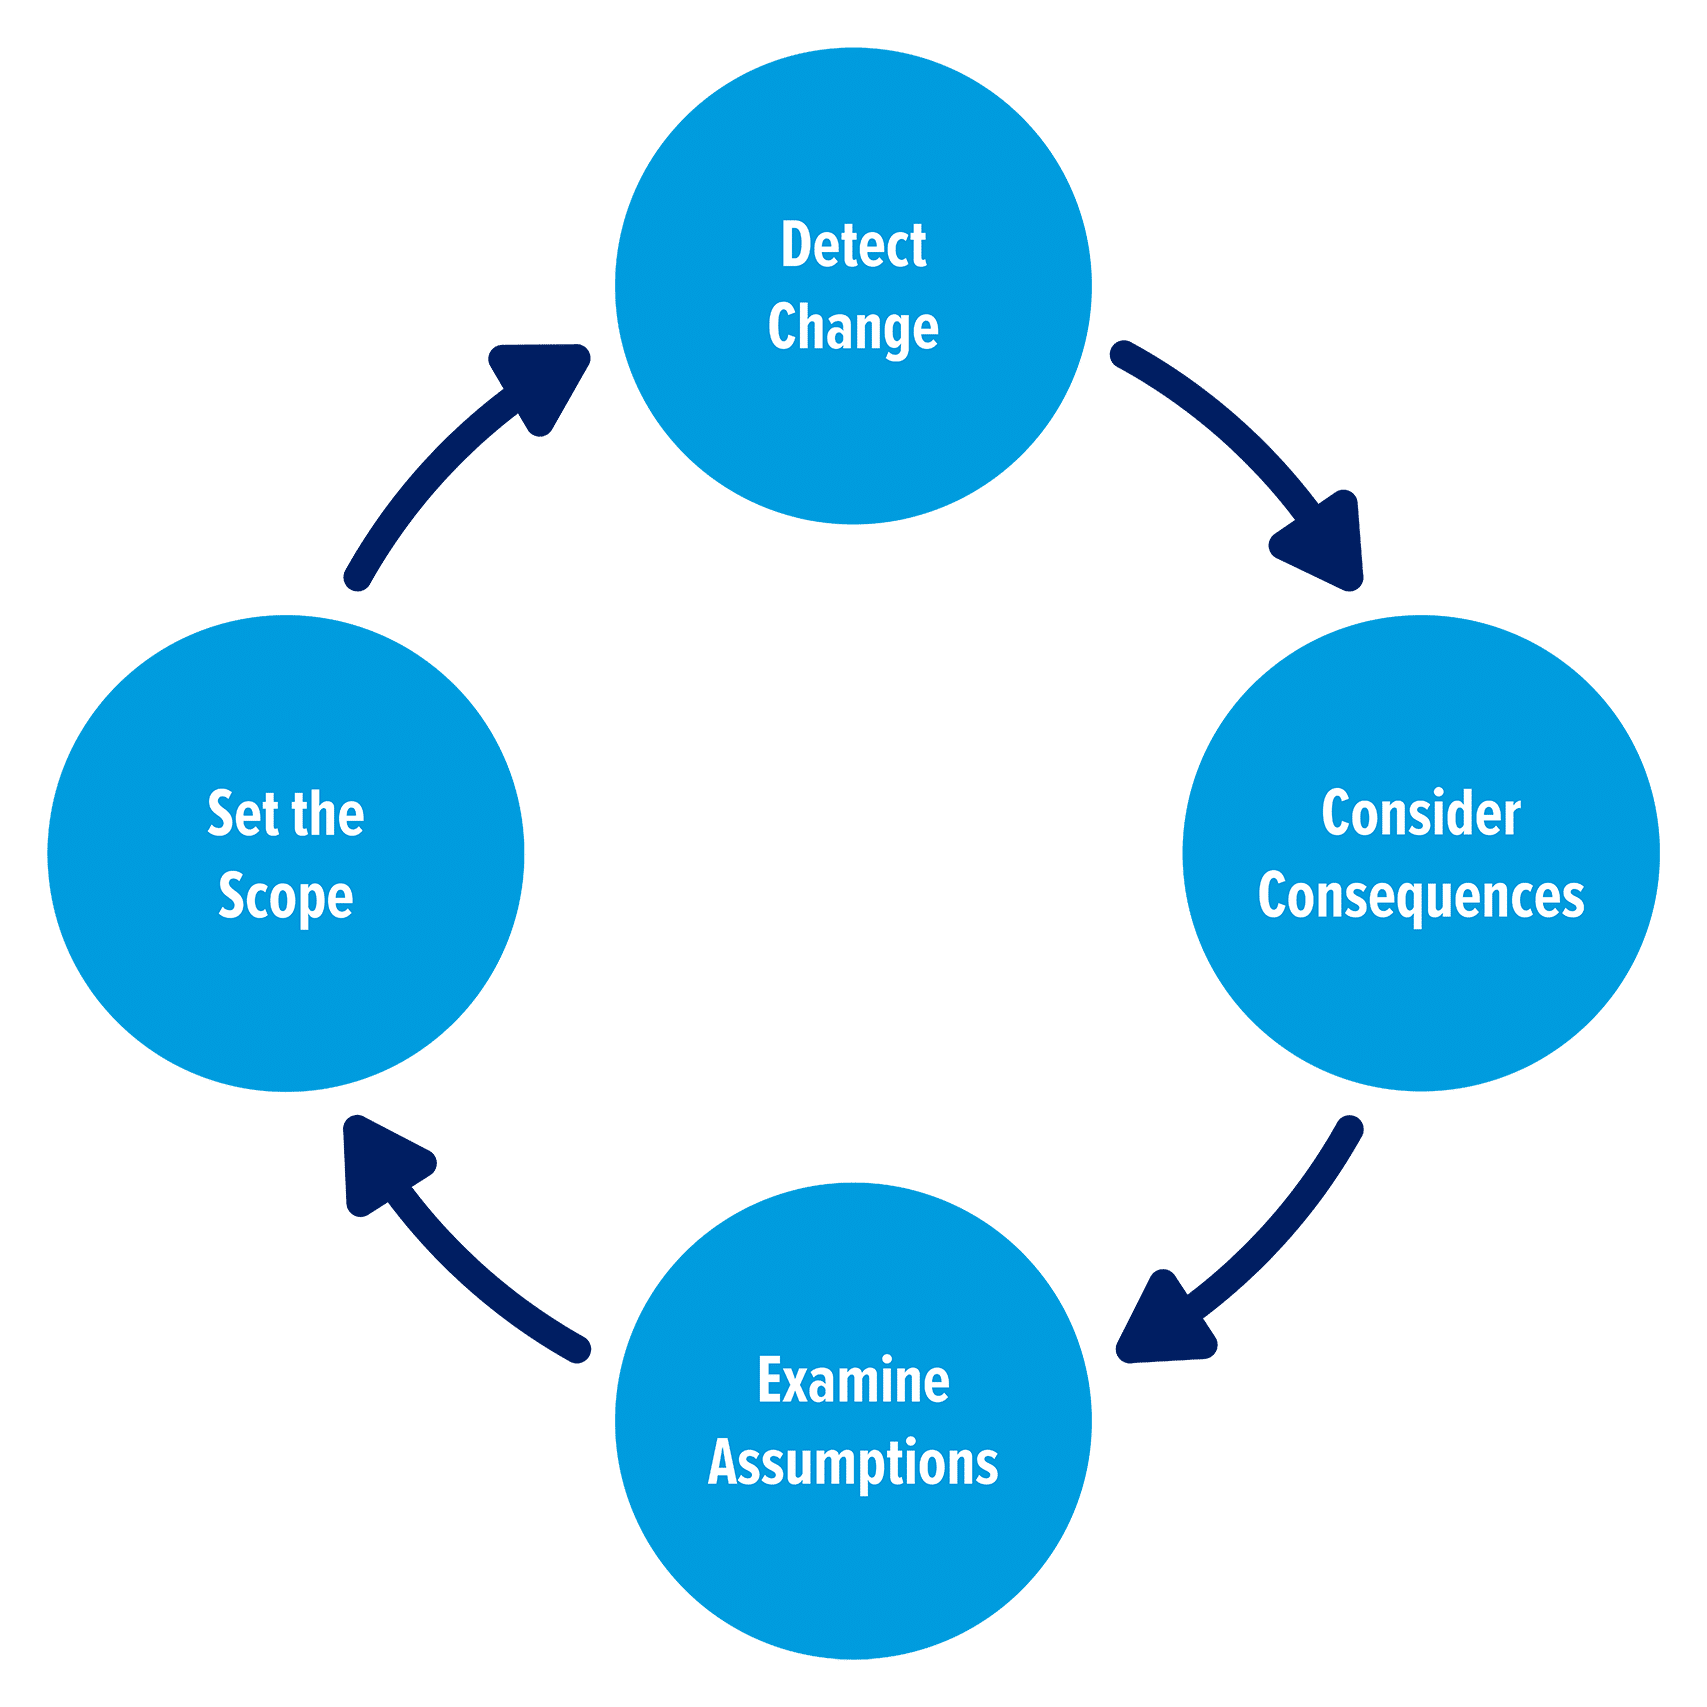 a loop with "detect change" feeding into the next stage "consider consequences" leading to "examine assumptions" leading to "set the scope" leading to "detect change" and enters the loops again